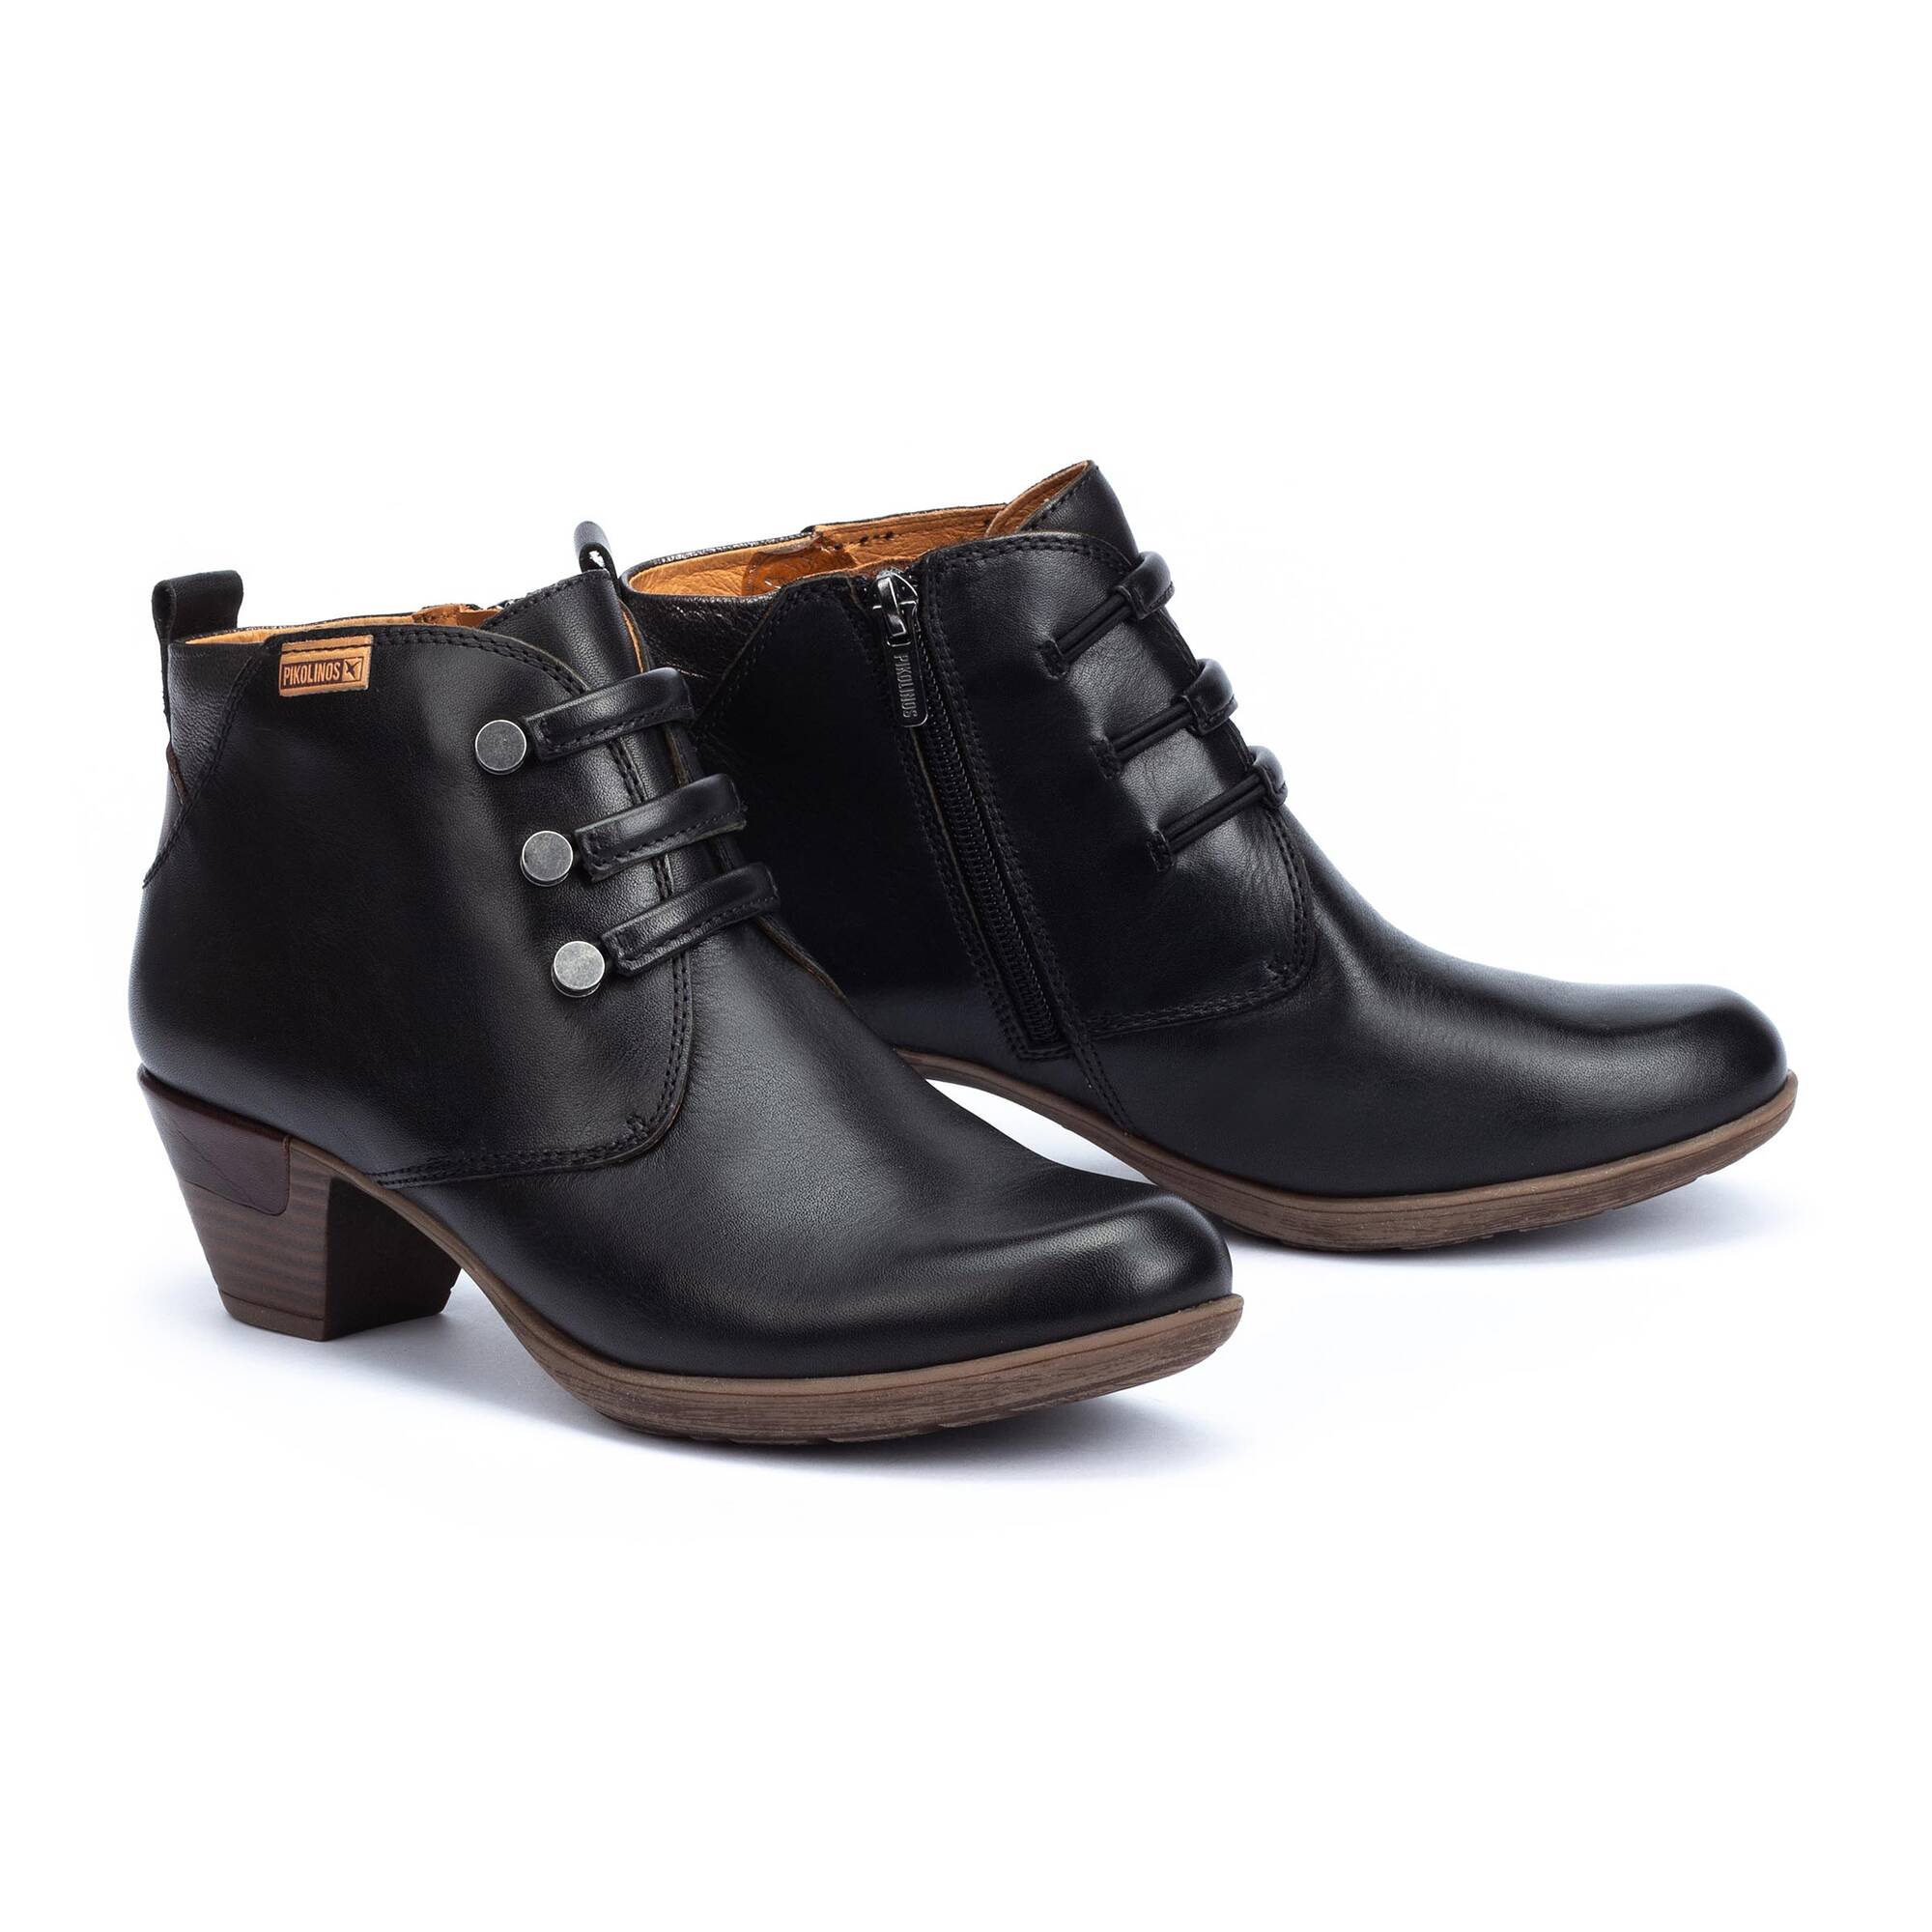 Ankle boots | ROTTERDAM 902-8746, BLACK, large image number 100 | null